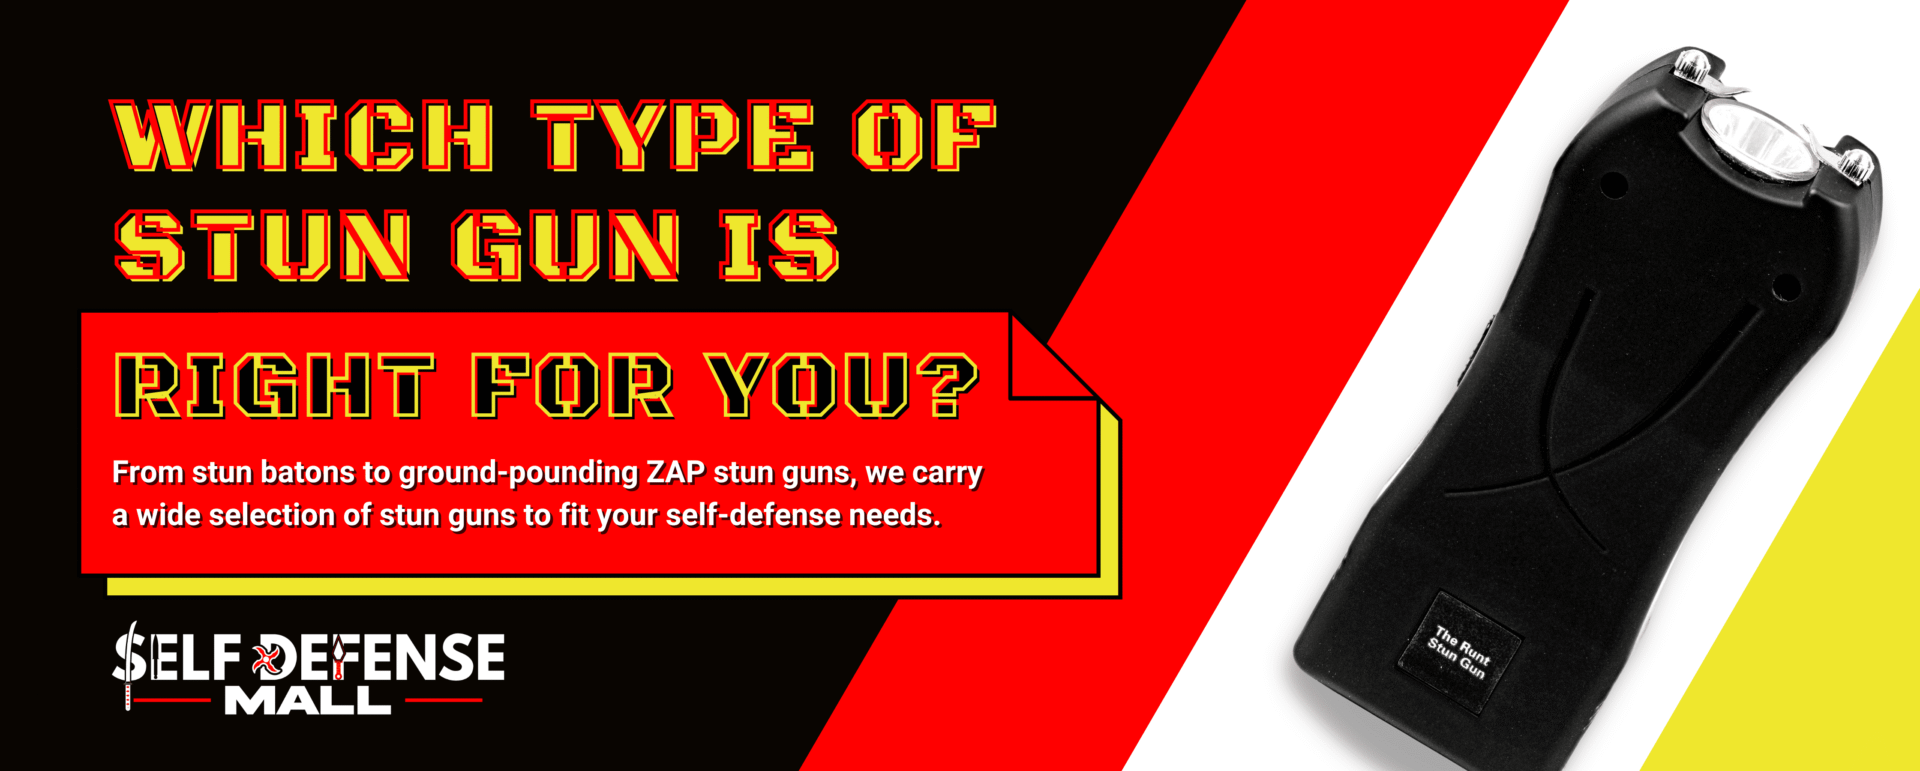 Which Type of Stun Gun is Right for You